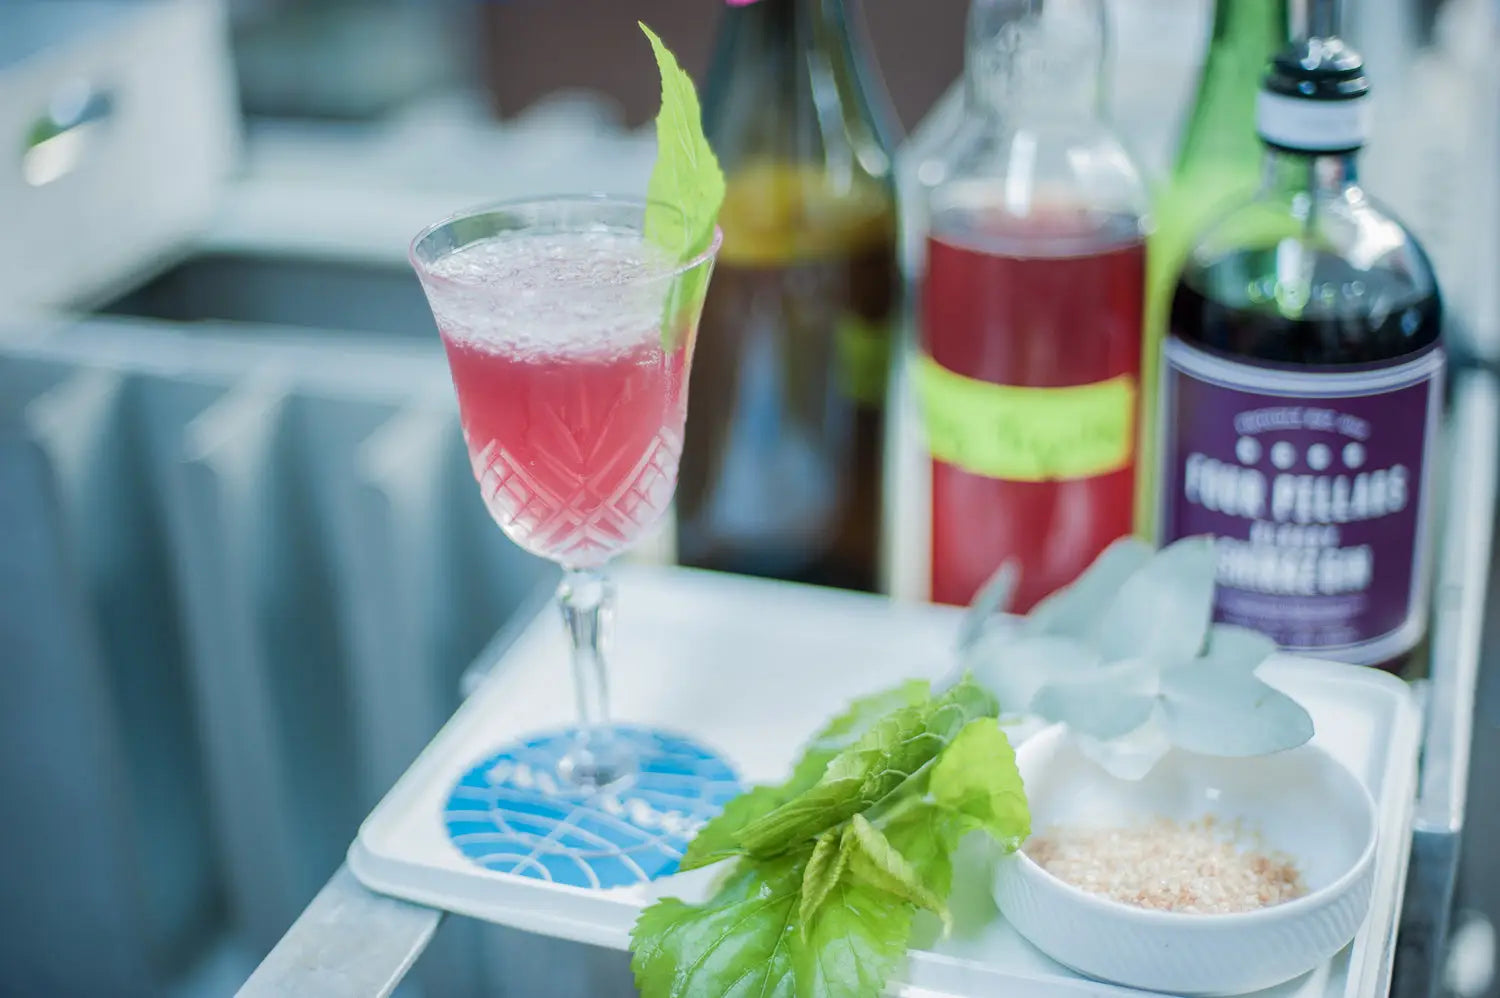 Cocktail Recipe: Quandong, Mulberry Leaf & Olsson’s Smoked